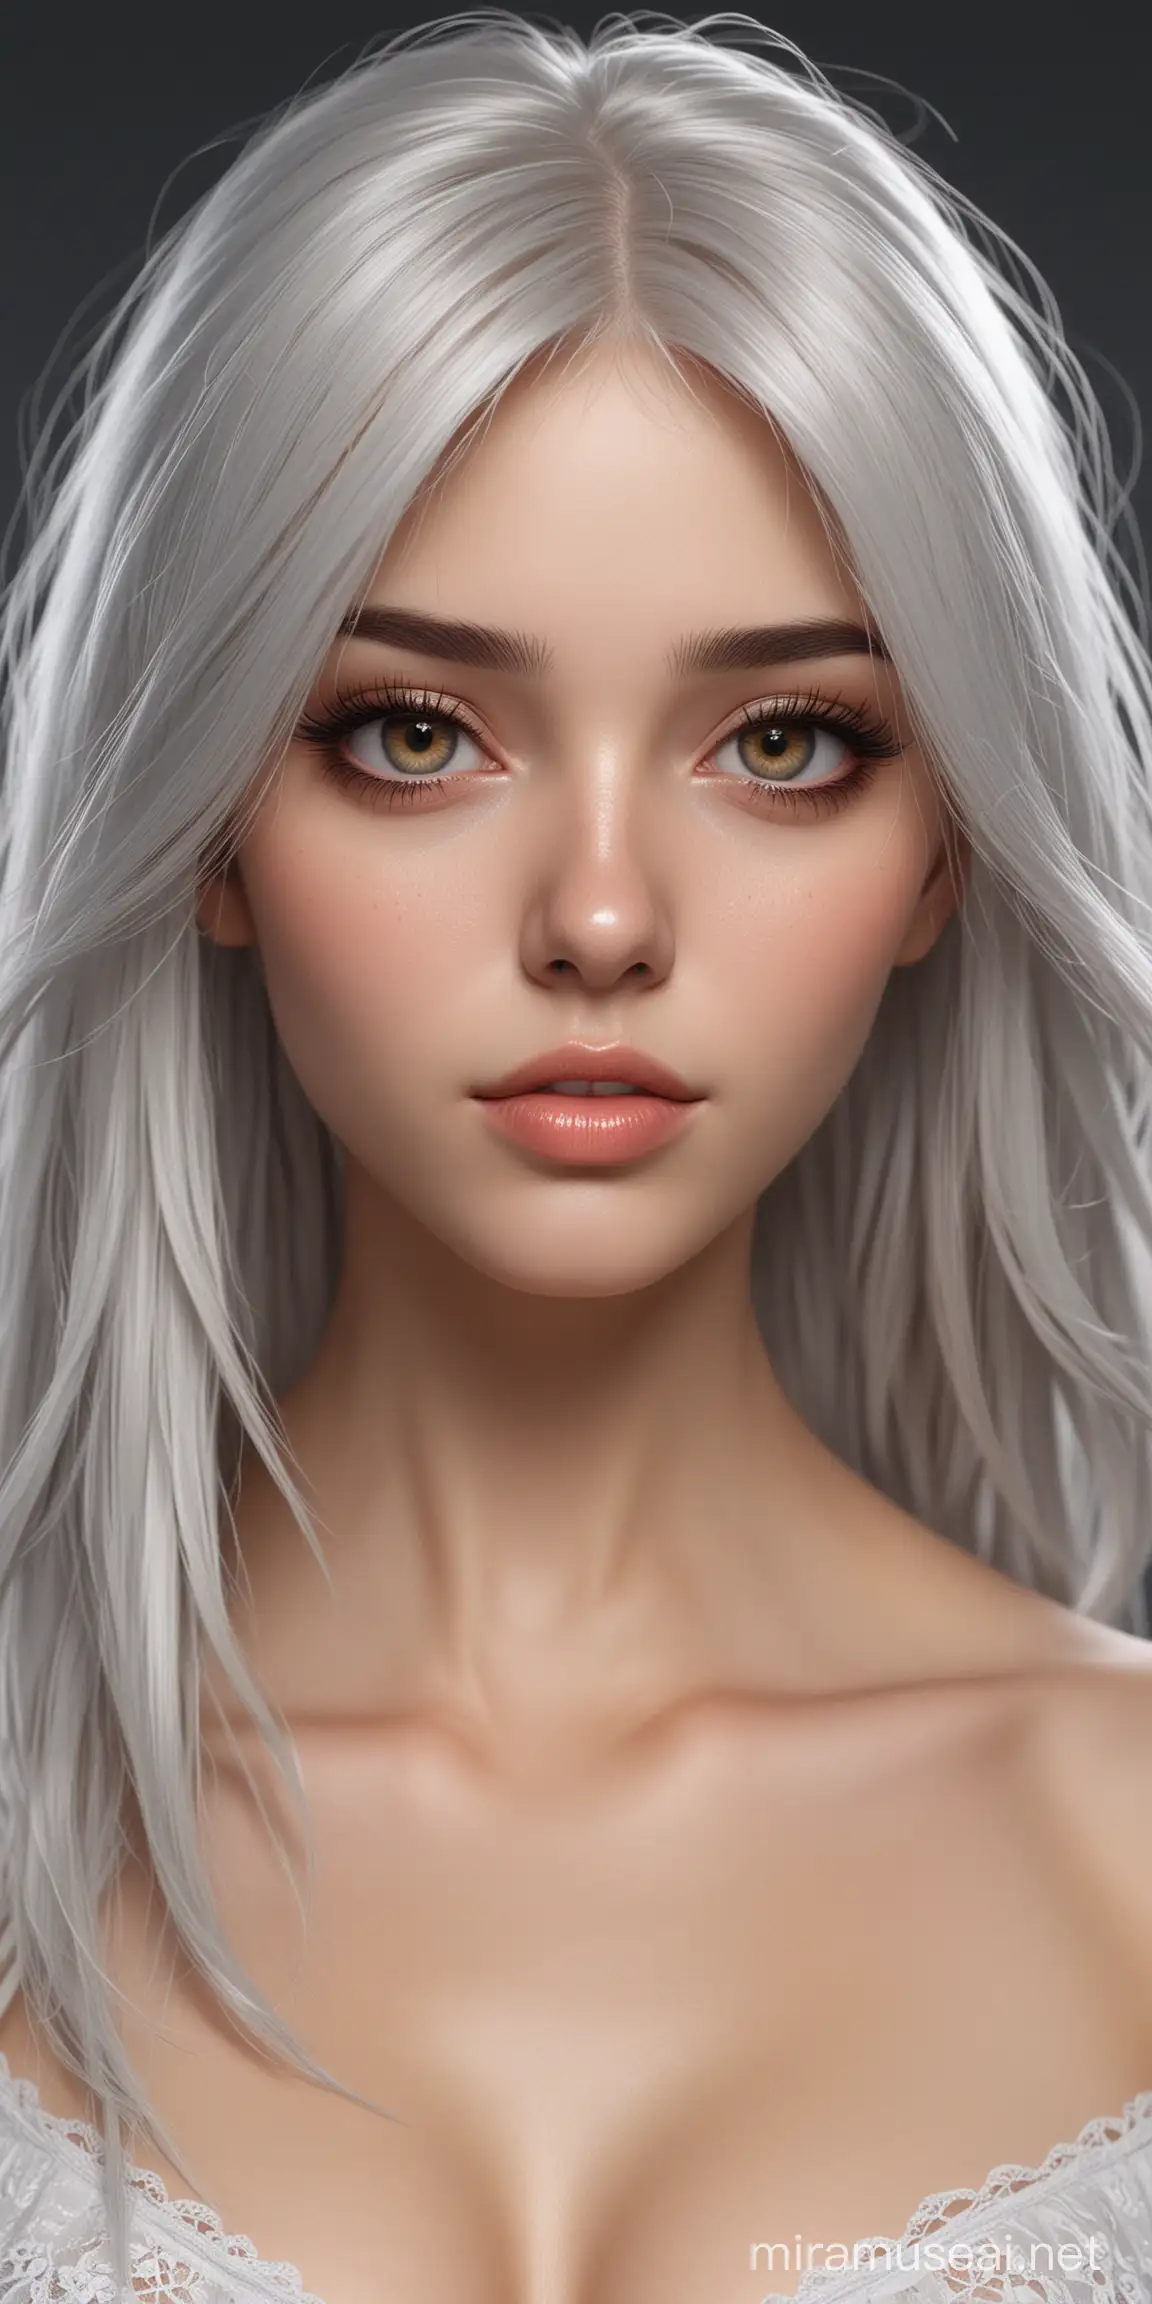 Digital Art Ethereal Brunette Girl with Unique White Hair and Eyes